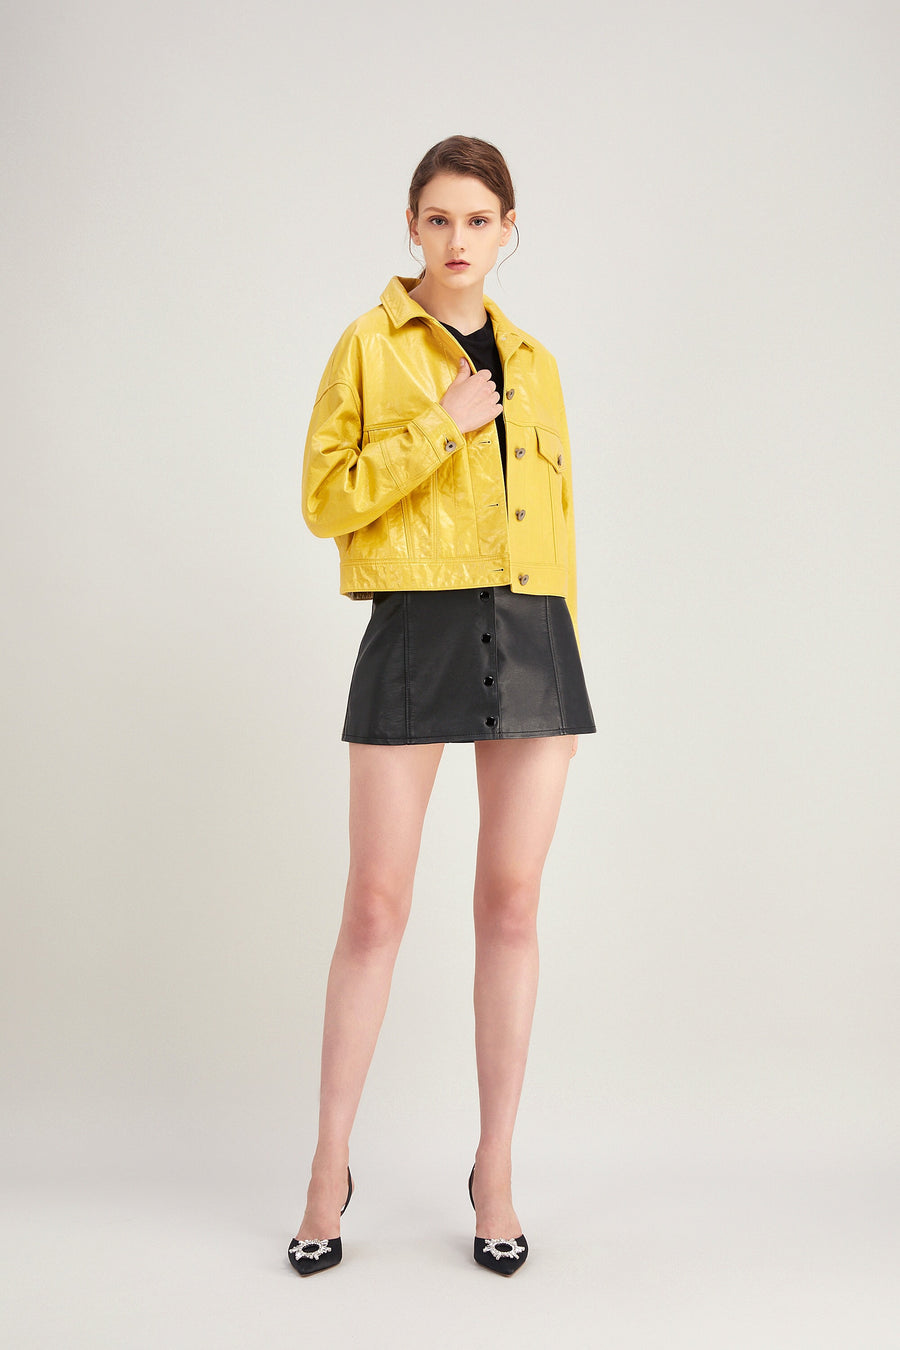 Chloey leather jacket in yellow – Anna Xi